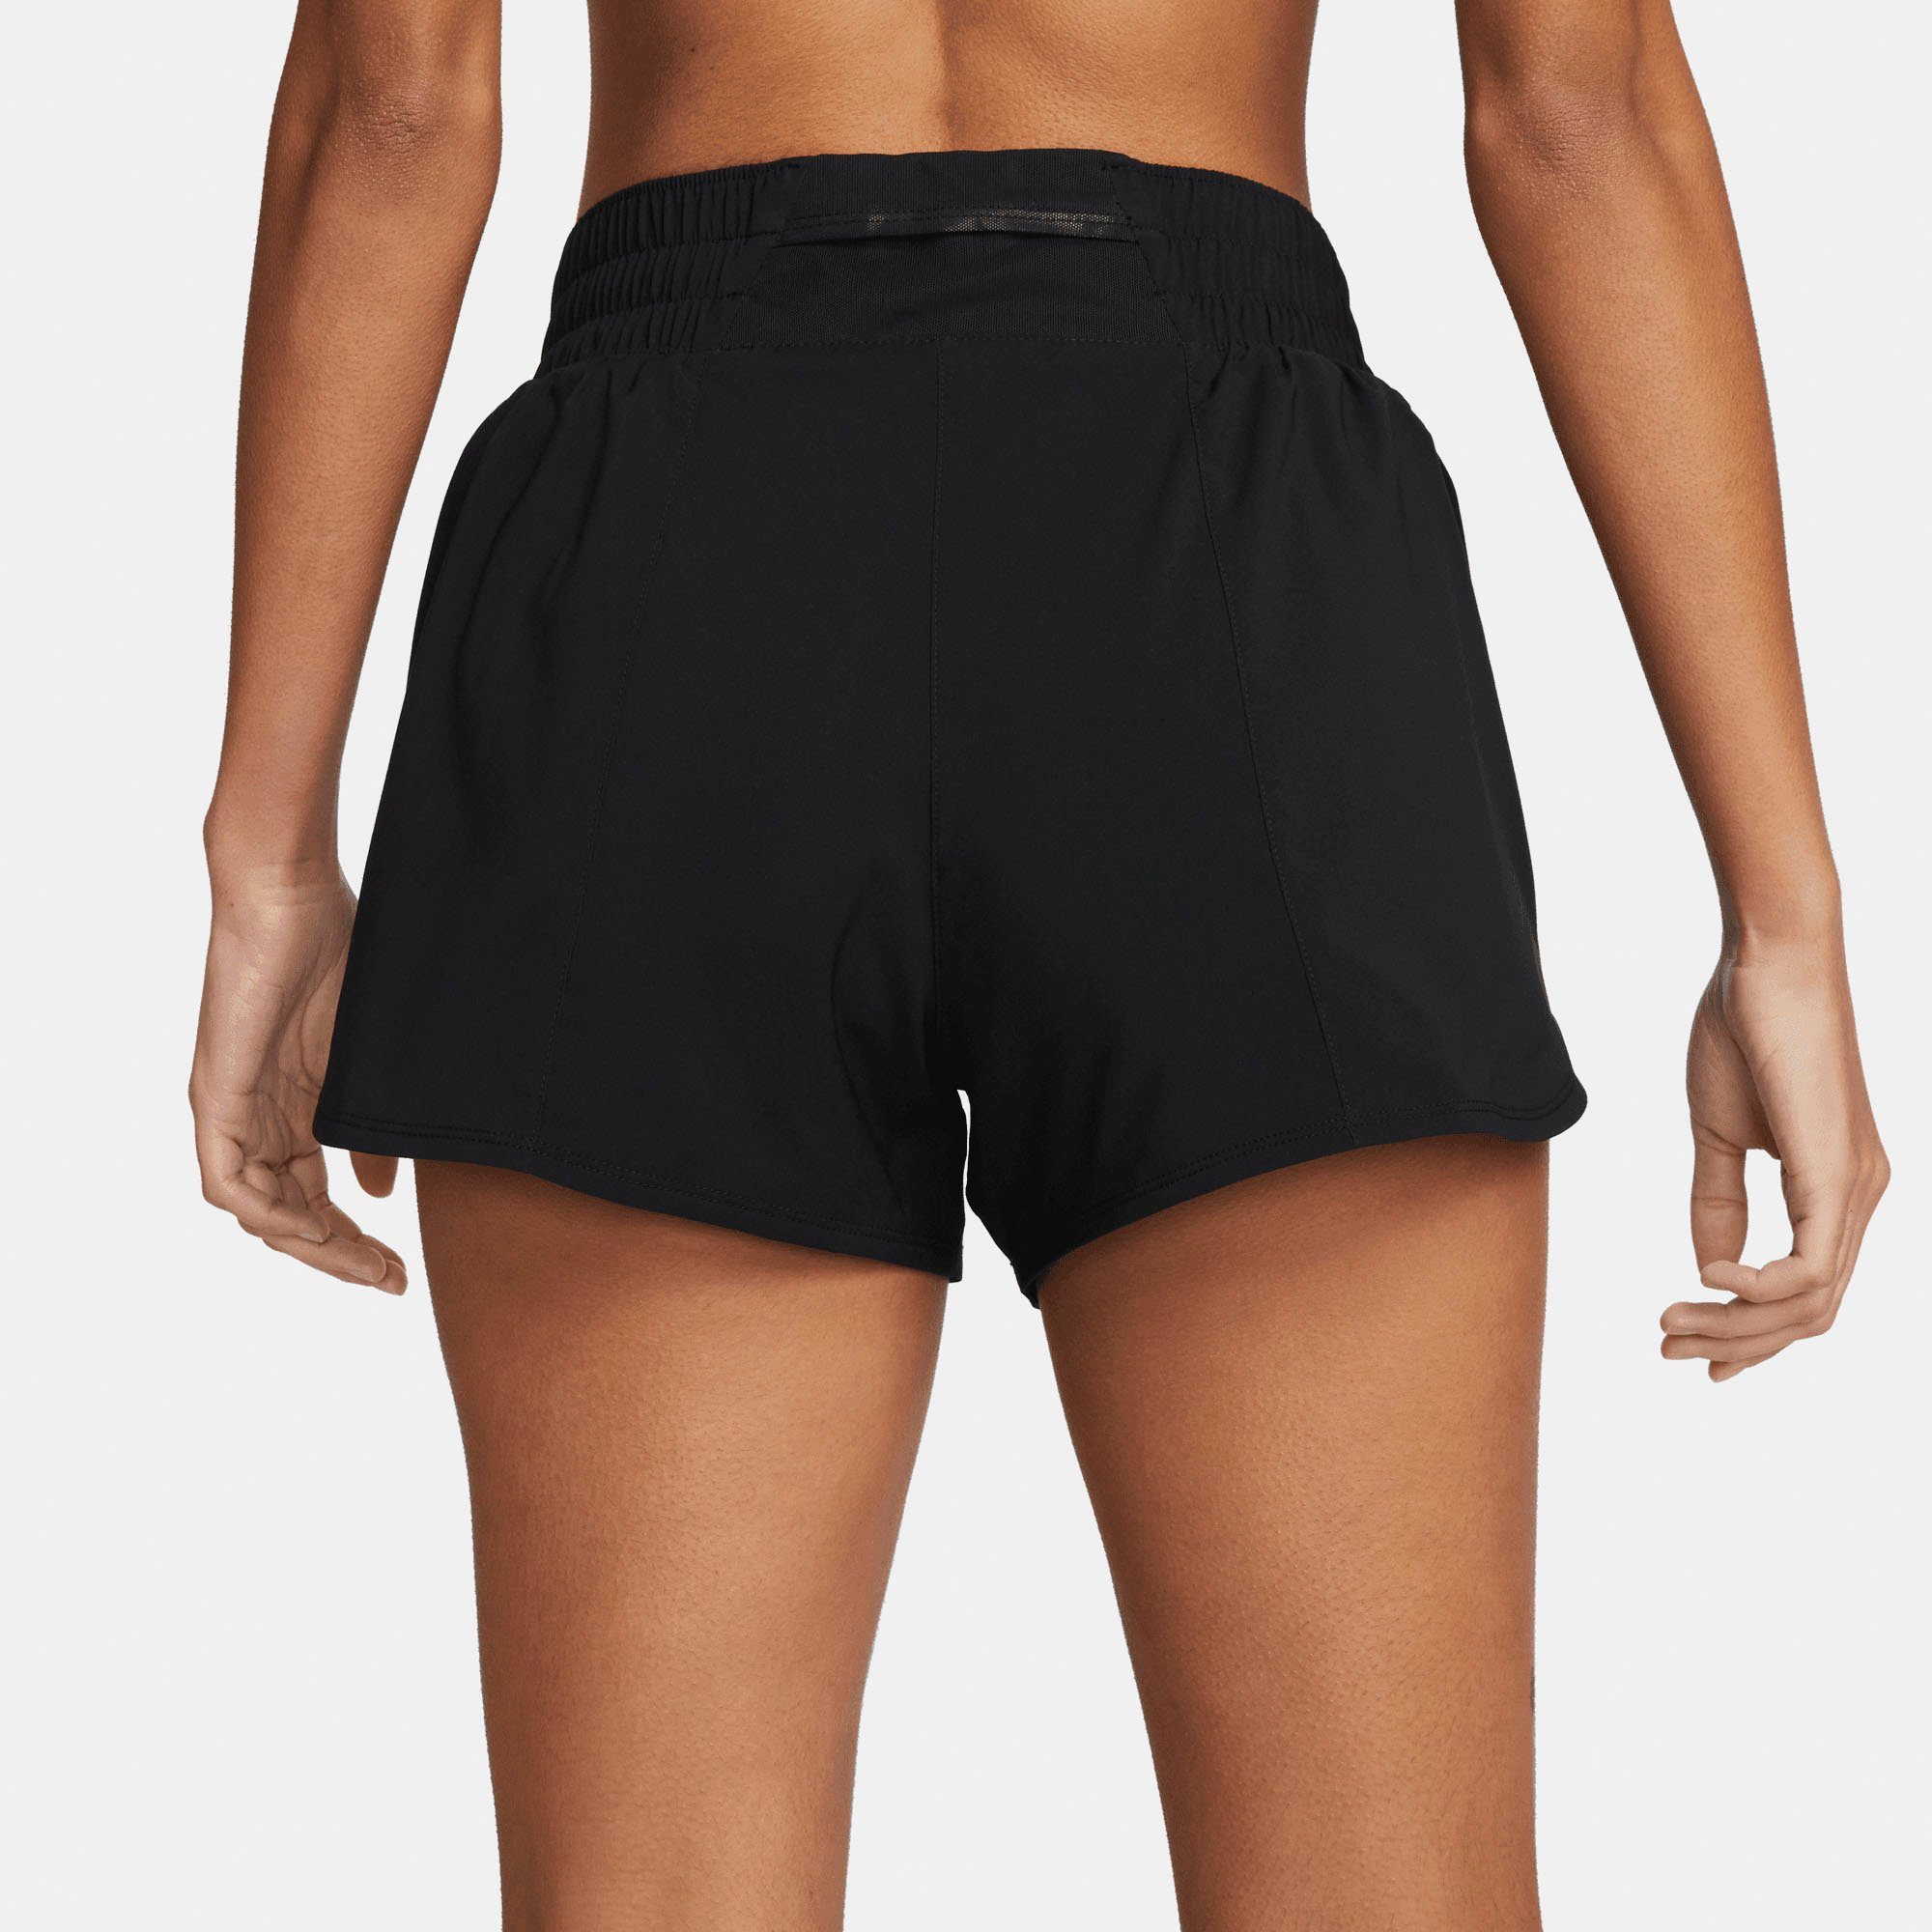 ONE SILV DRI-FIT Nike WOMEN'S BRIEF-LINED Trainingsshorts MID-RISE SHORTS BLACK/REFLECTIVE